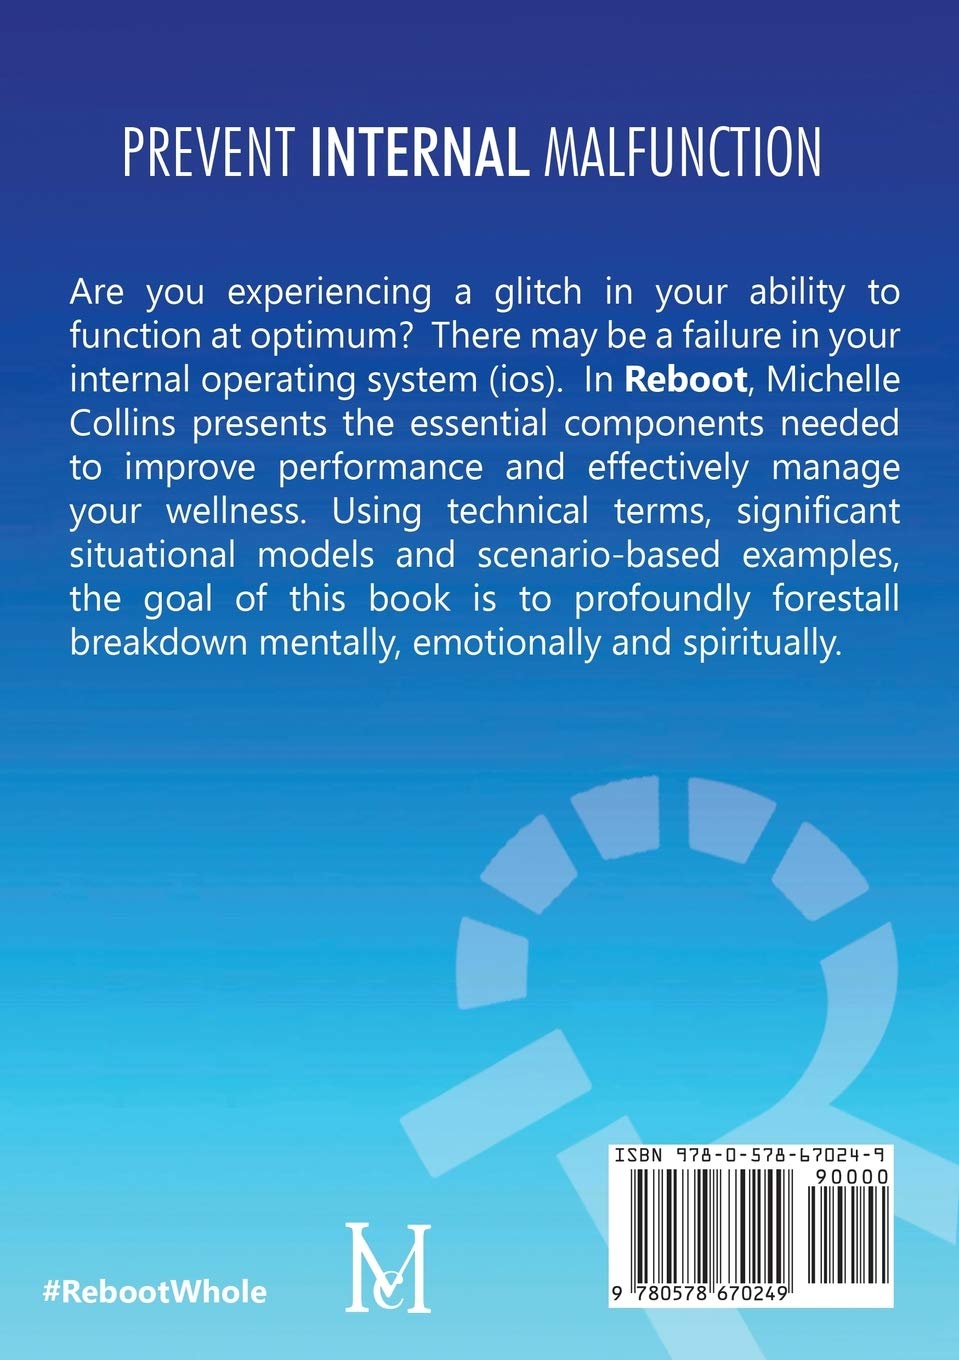 Reboot: Operate on a Whole New Level Paperback – May 15, 2020 by Michelle Collins (Author)